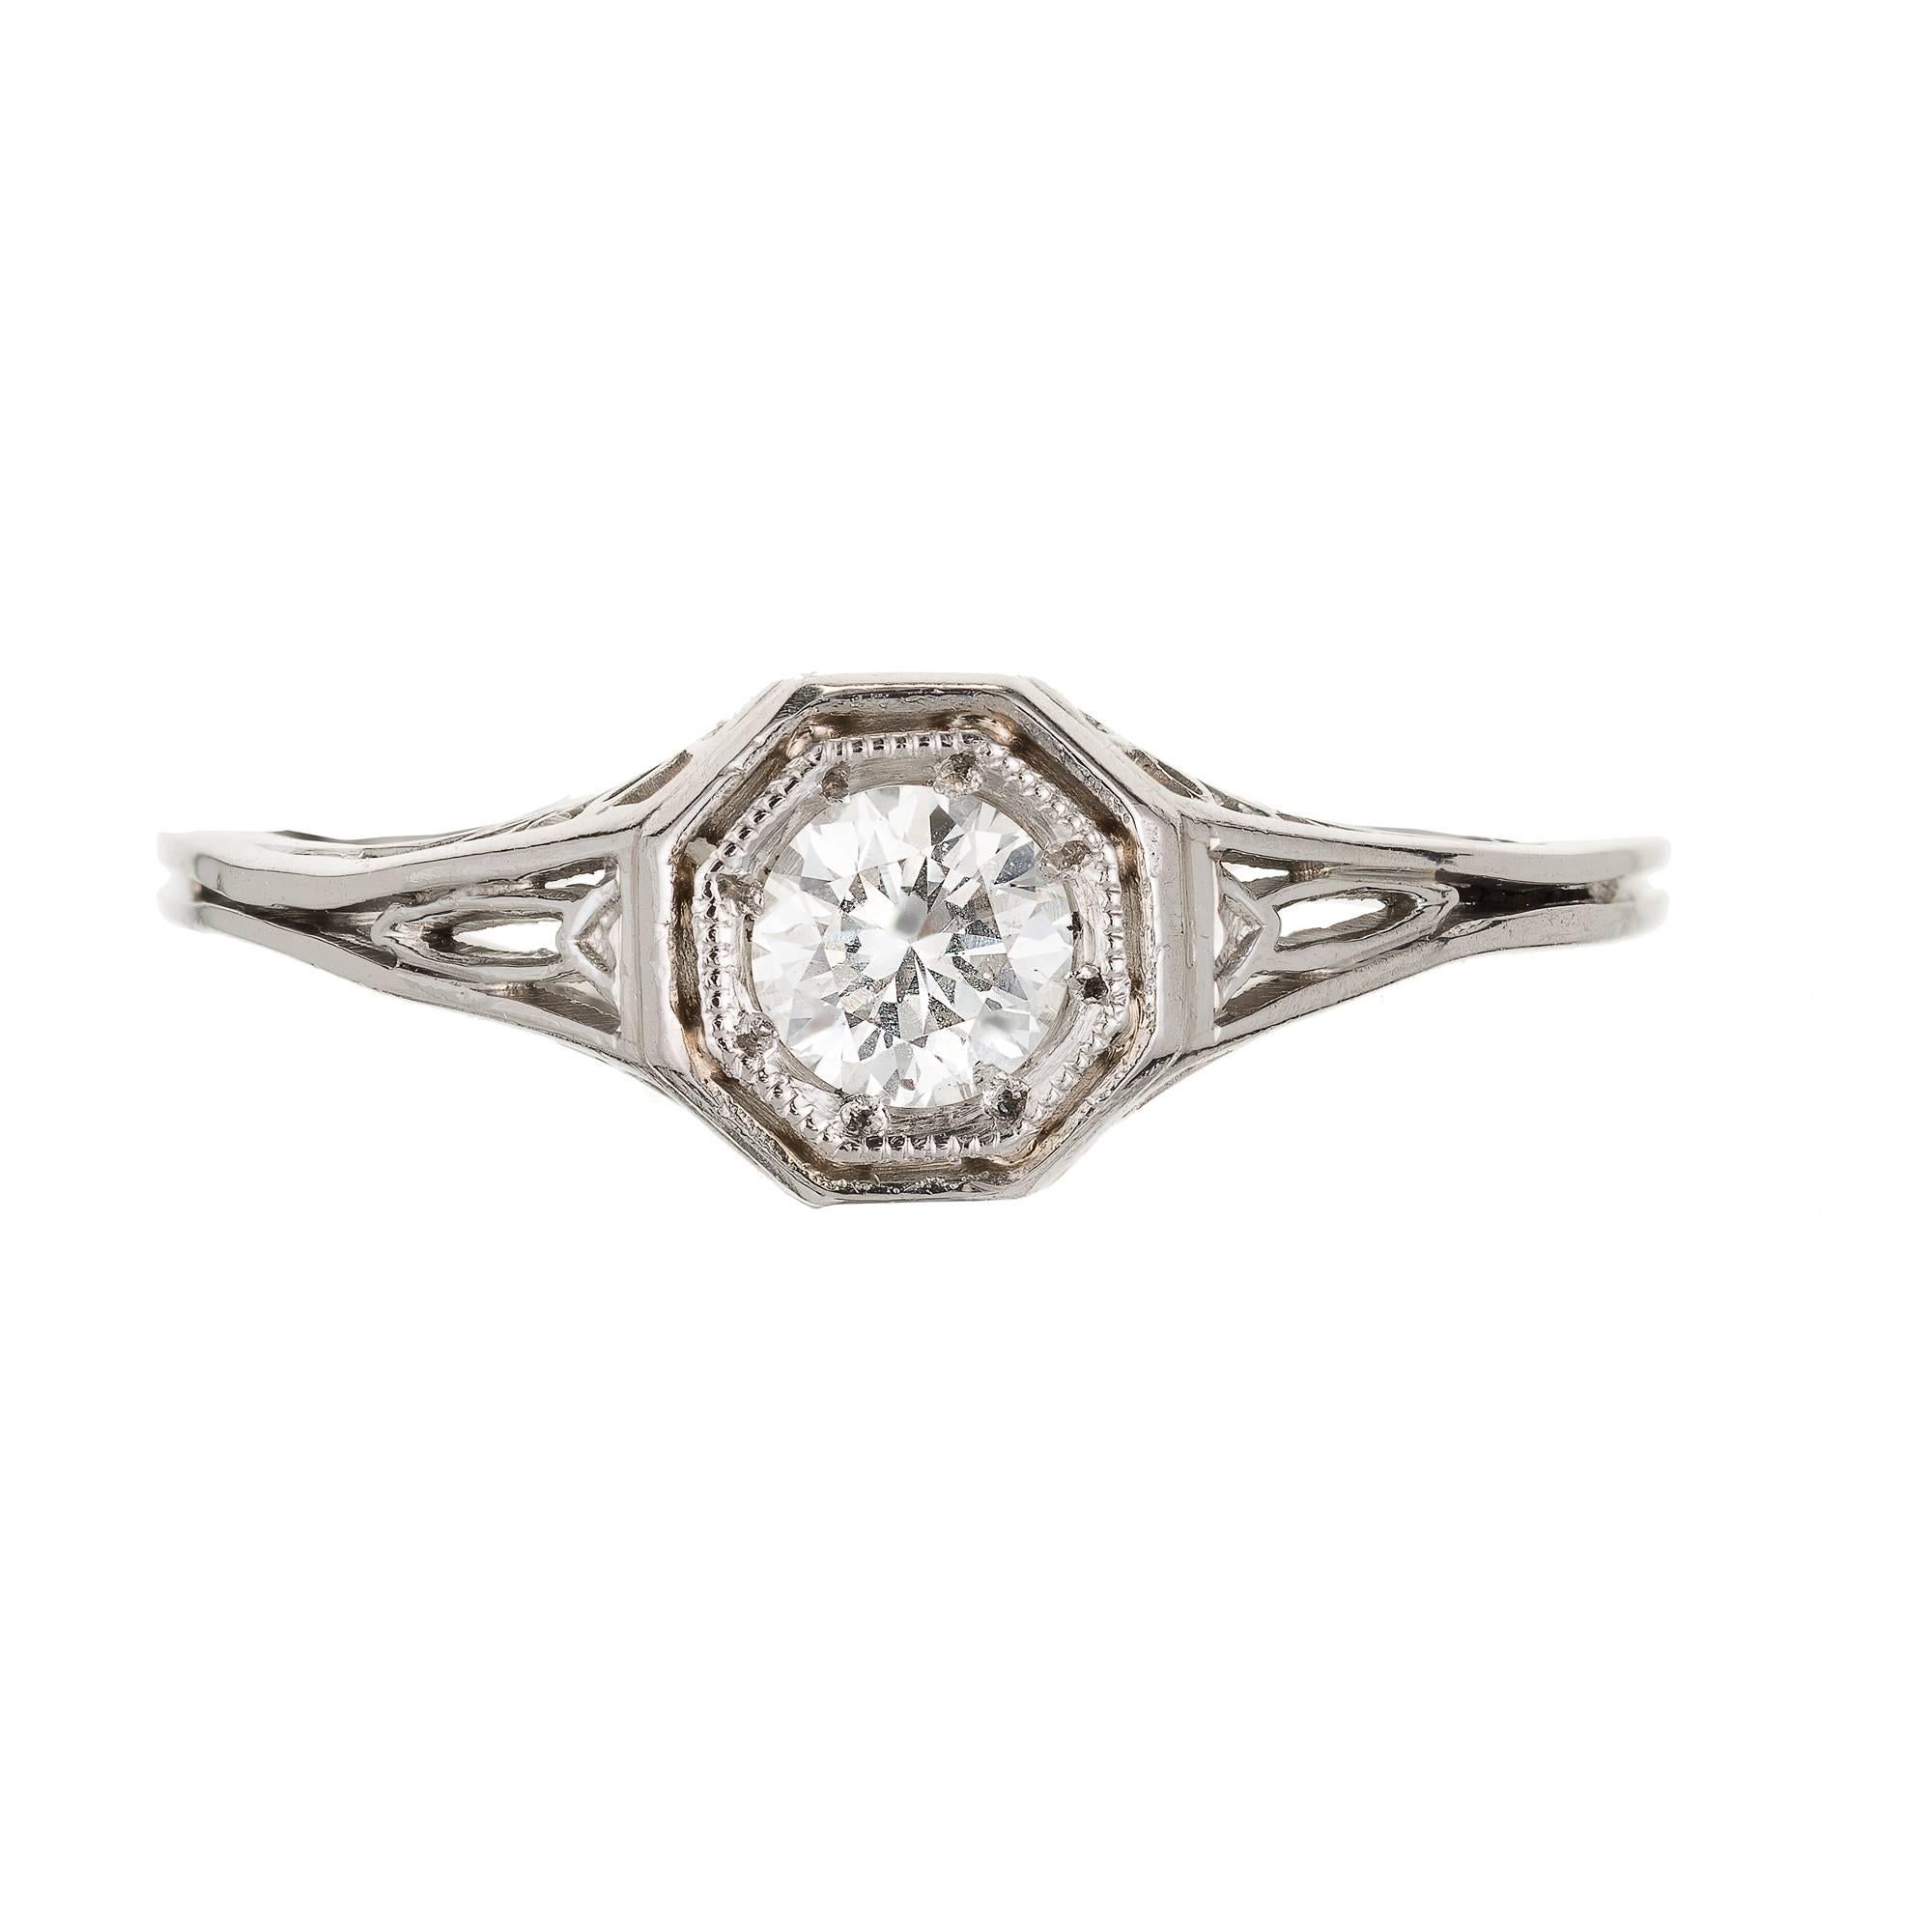 All original antique Art Deco Platinum engagement ring circa 1930 – 1940 with a delicate handmade pierced ring and a very bright well cut transitional brilliant cut Diamond EGL certified .23cts F – G color, SI1.

1 round transitional brilliant cut